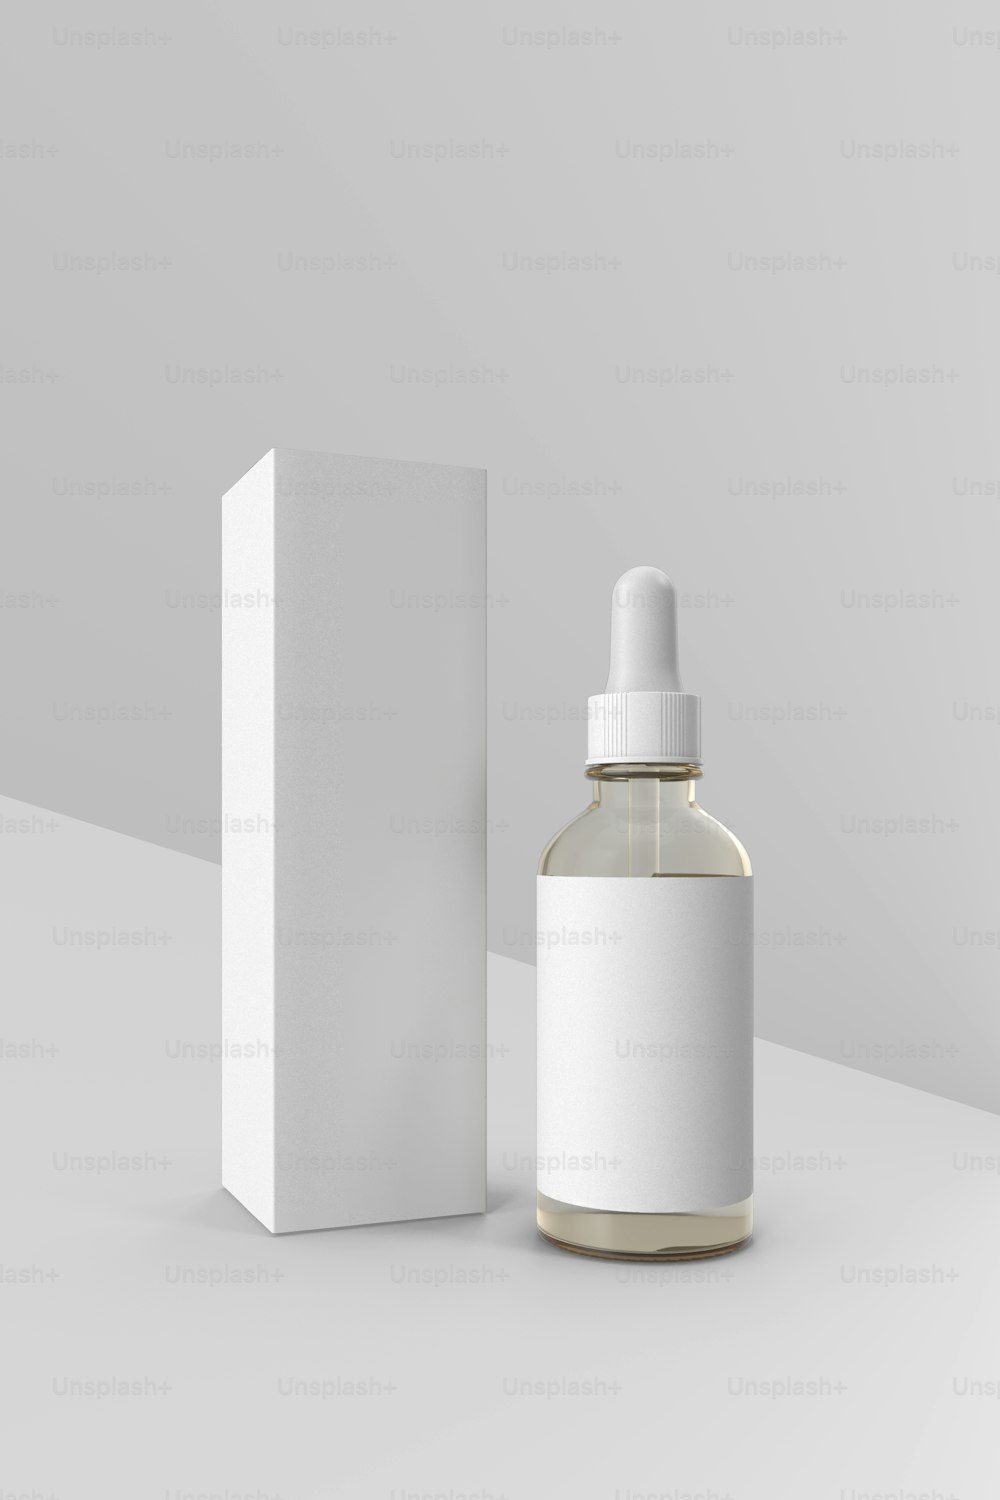 a bottle of liquid next to a white box